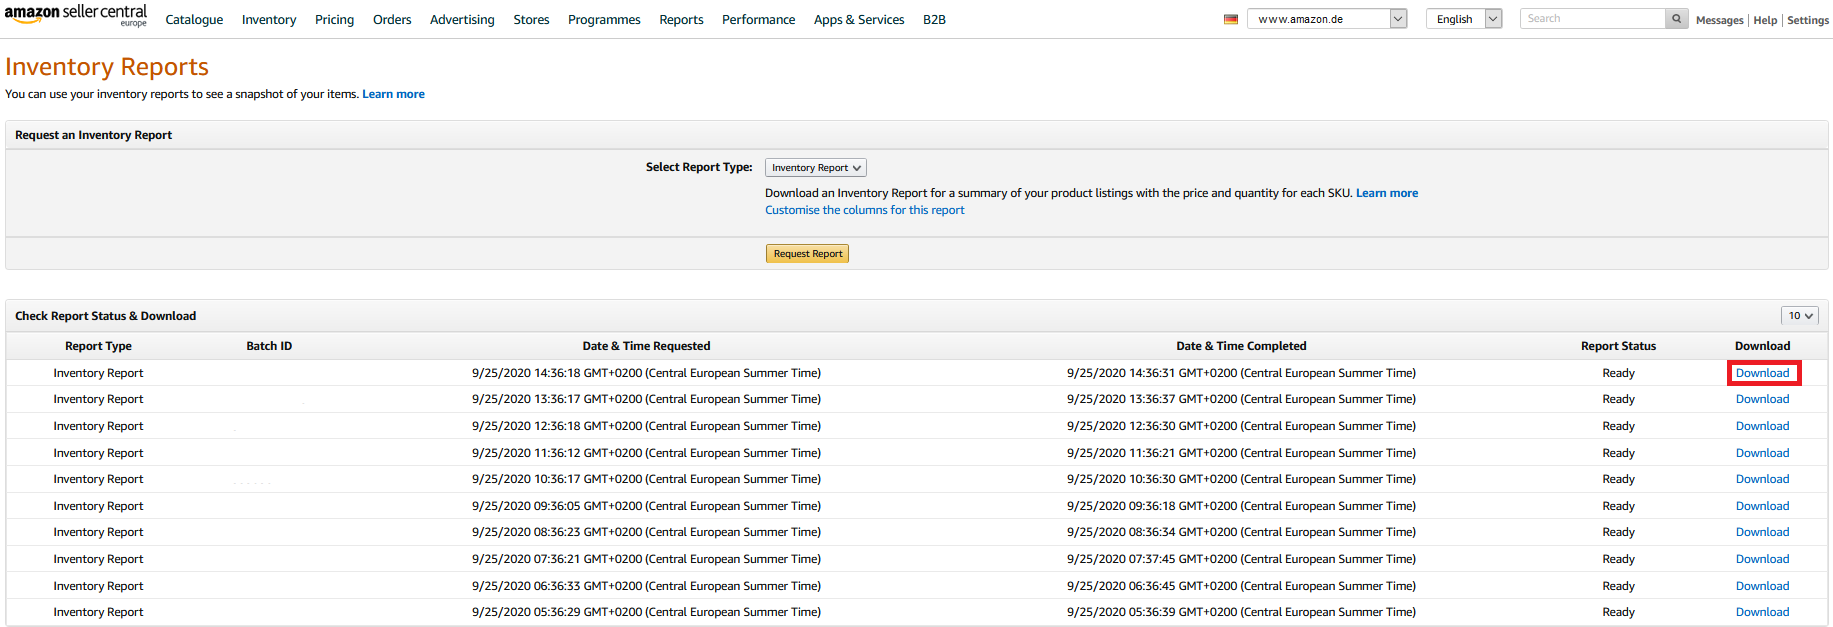 Amazon_-_Inventory_and_Processing_Report__-_Download.png